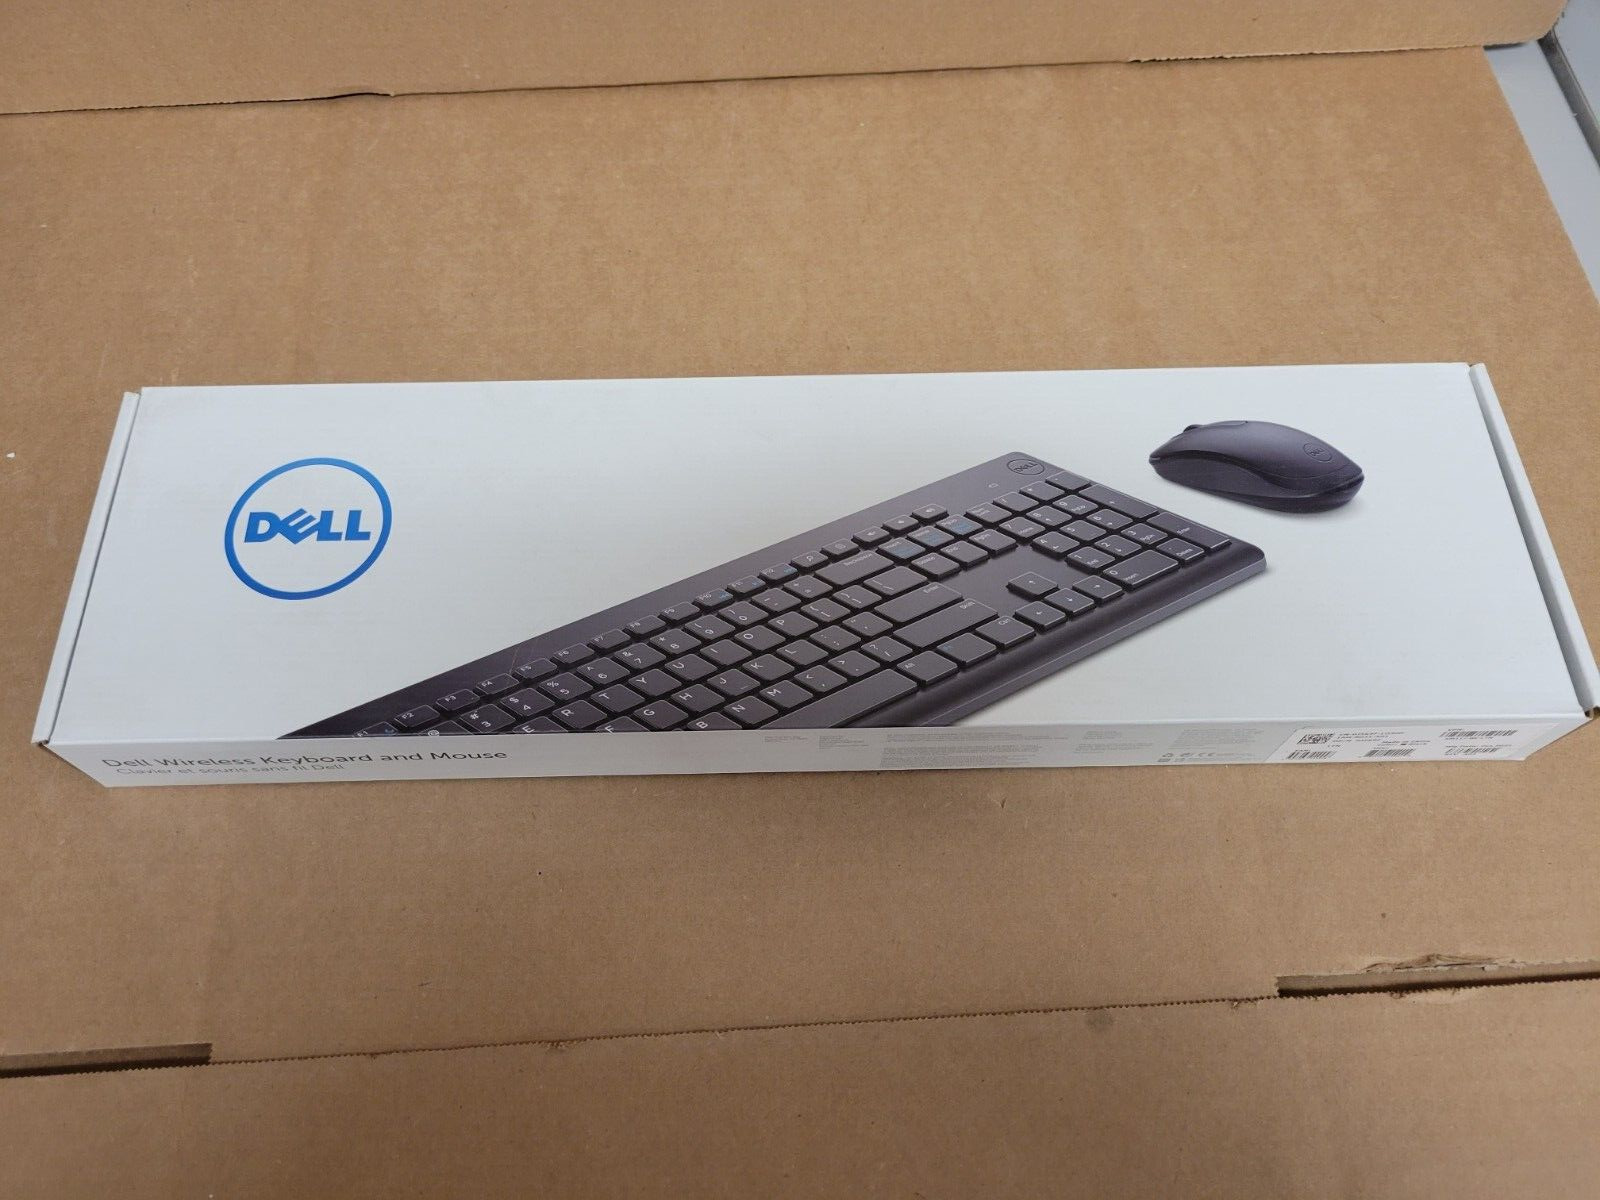 NEW SEALED Dell KM117 Black Wireless Keyboard  Mouse **SPANISH LAYOUT**